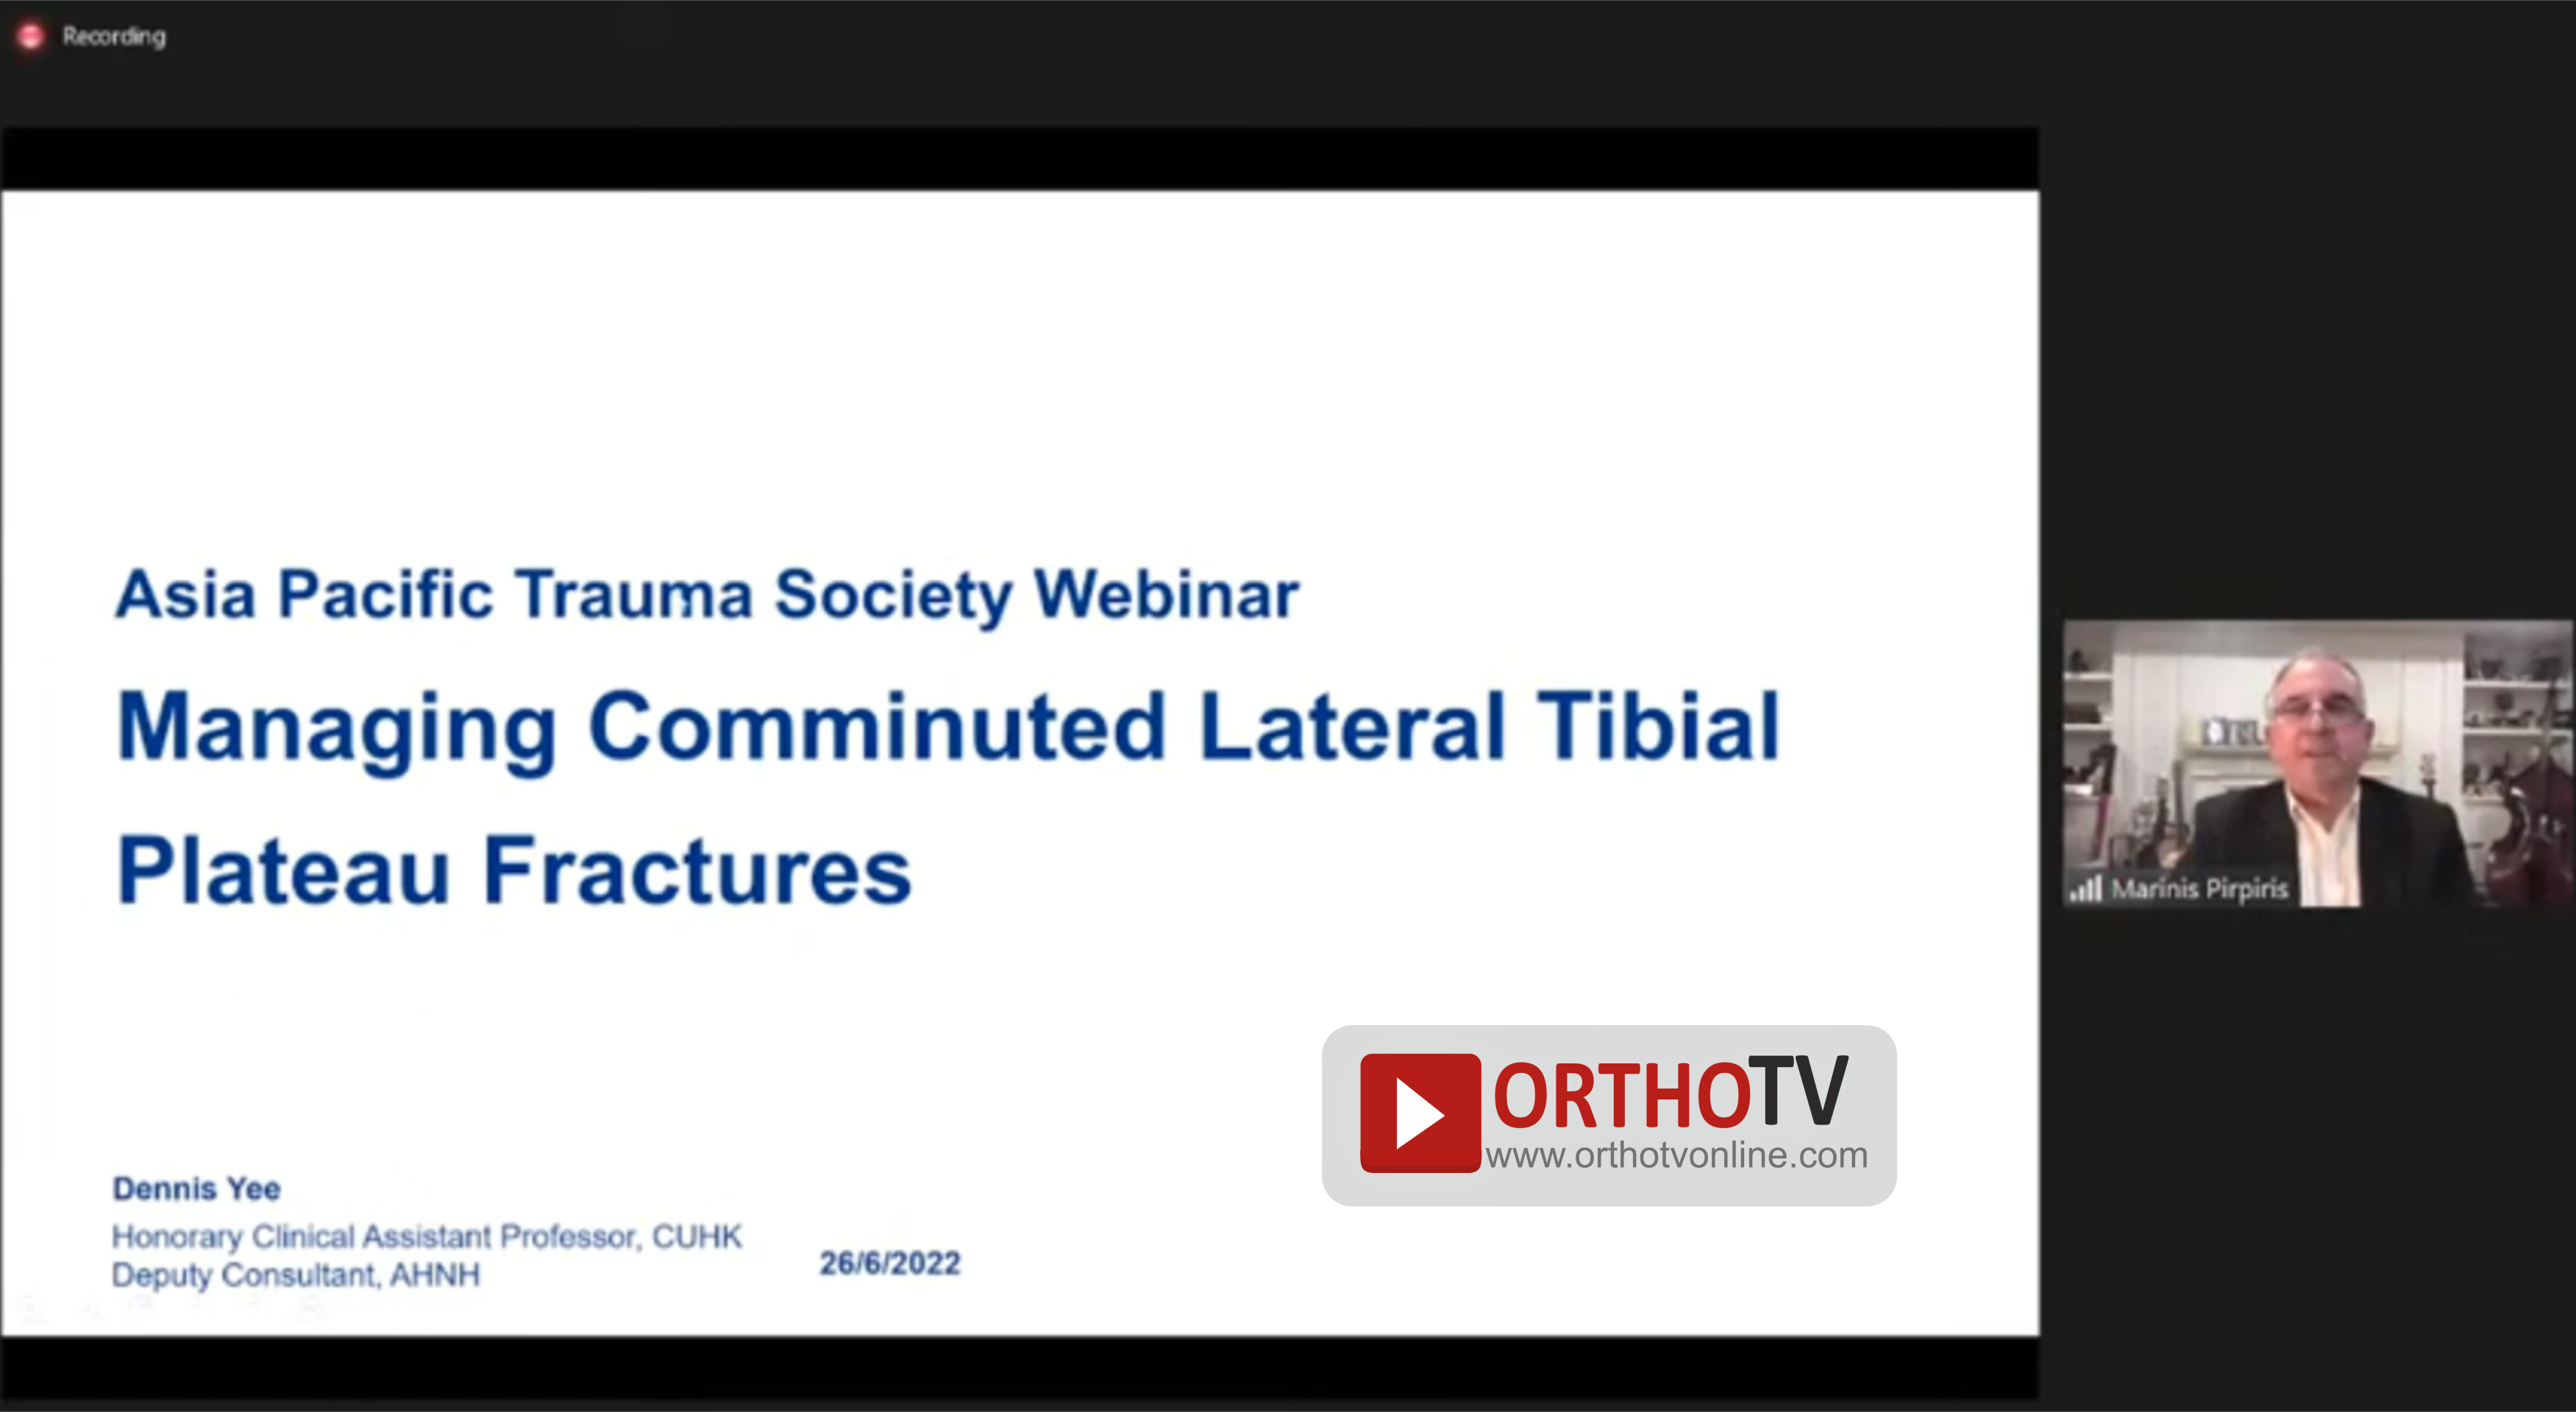 Dr Dennis Yee - Managing Comminuted Lateral Tibial Plateau Fractures 